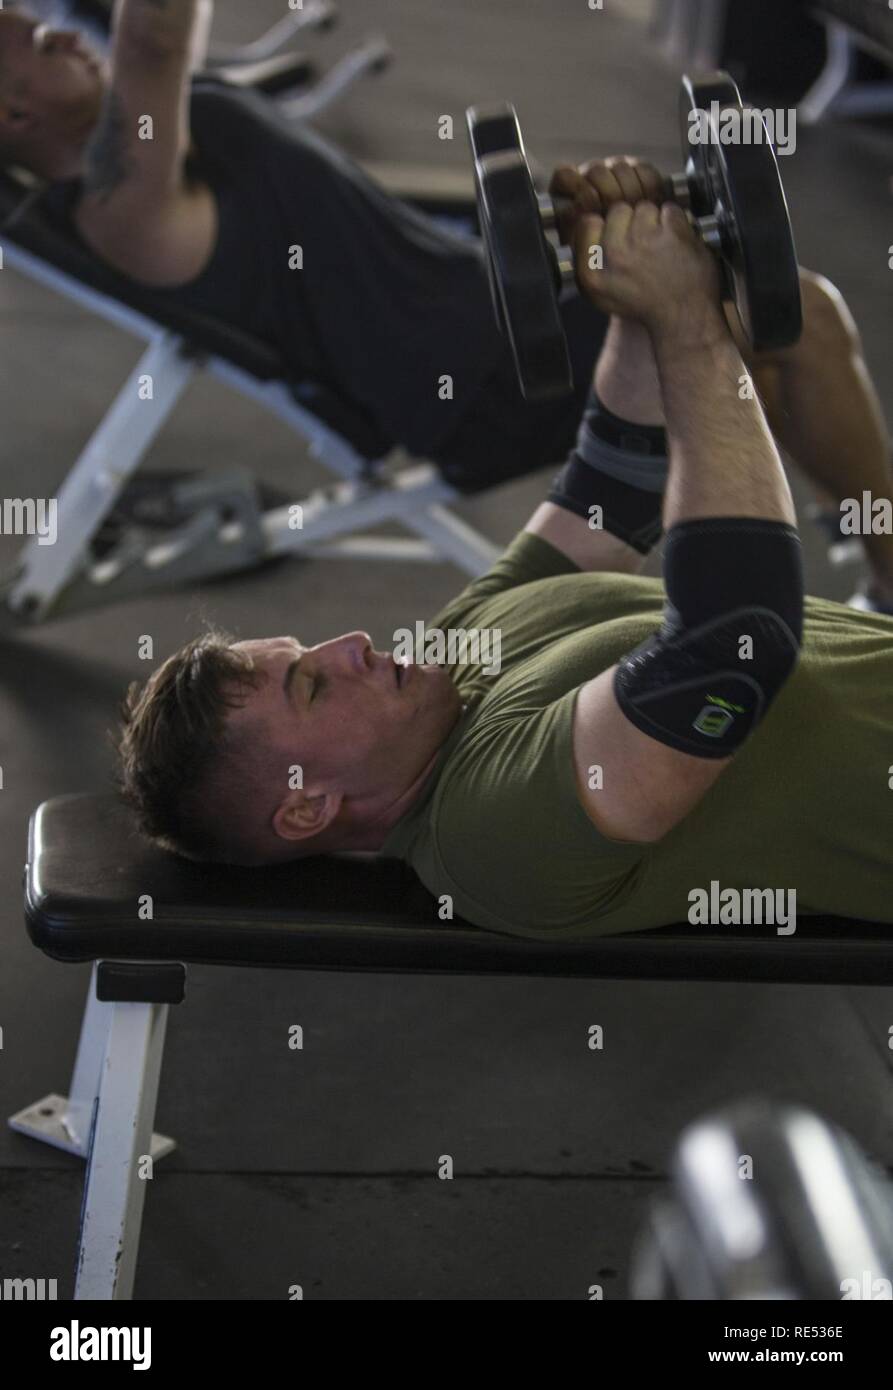 U.S. Marines Corps Lance Cpl. Kaden Cox, water support technician, 7th Engineer Support Battalion, Combat Logistics Regiment 1, 1st Marine Logistics Group, conducts an individual work out at Paige Fieldhouse, Marine Corps Base Camp Pendleton, California, Jan. 2, 2019. All Marines are required to undergo unit physical fitness training daily, but they are also highly encouraged to train on their own in order to achieve optimal physical fitness. Stock Photo